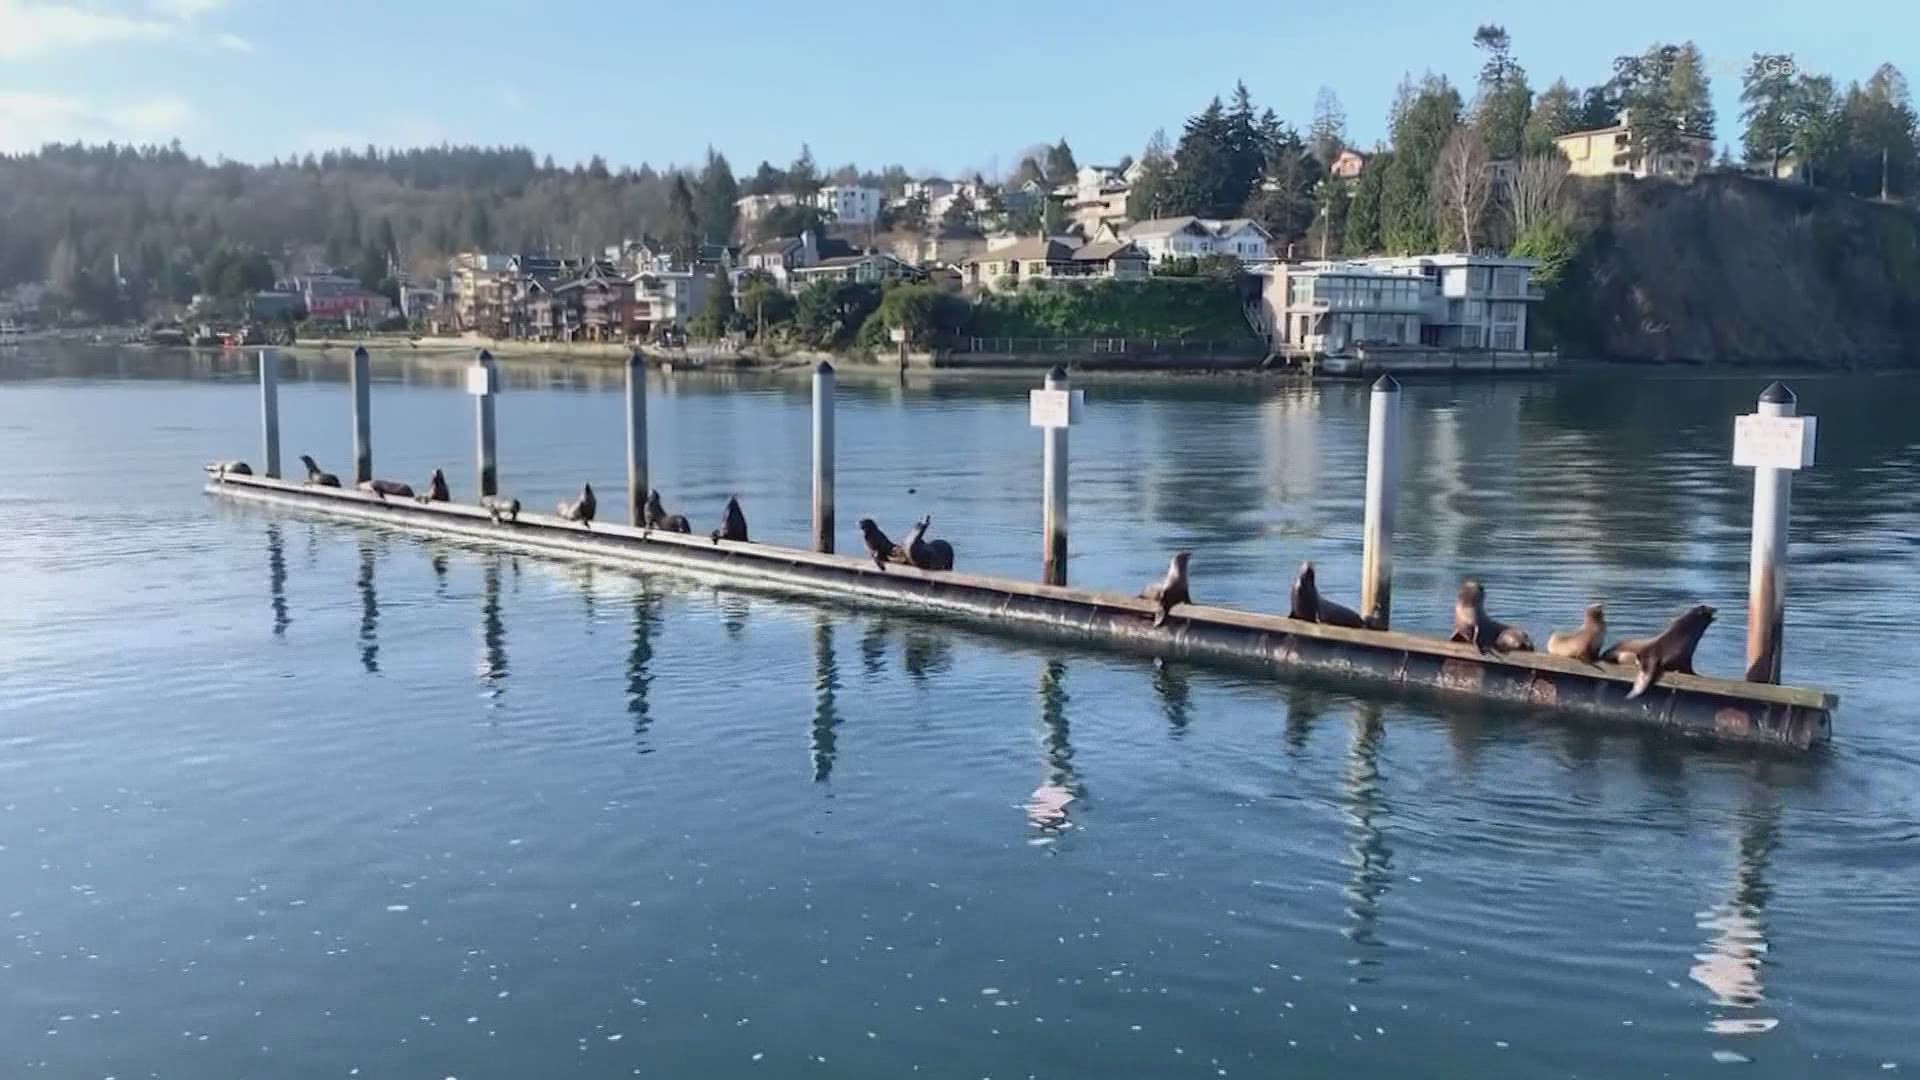 Up to 40 to 50 sea lions were seen congregating at a breakwater in Ballard, creating a spectacle.